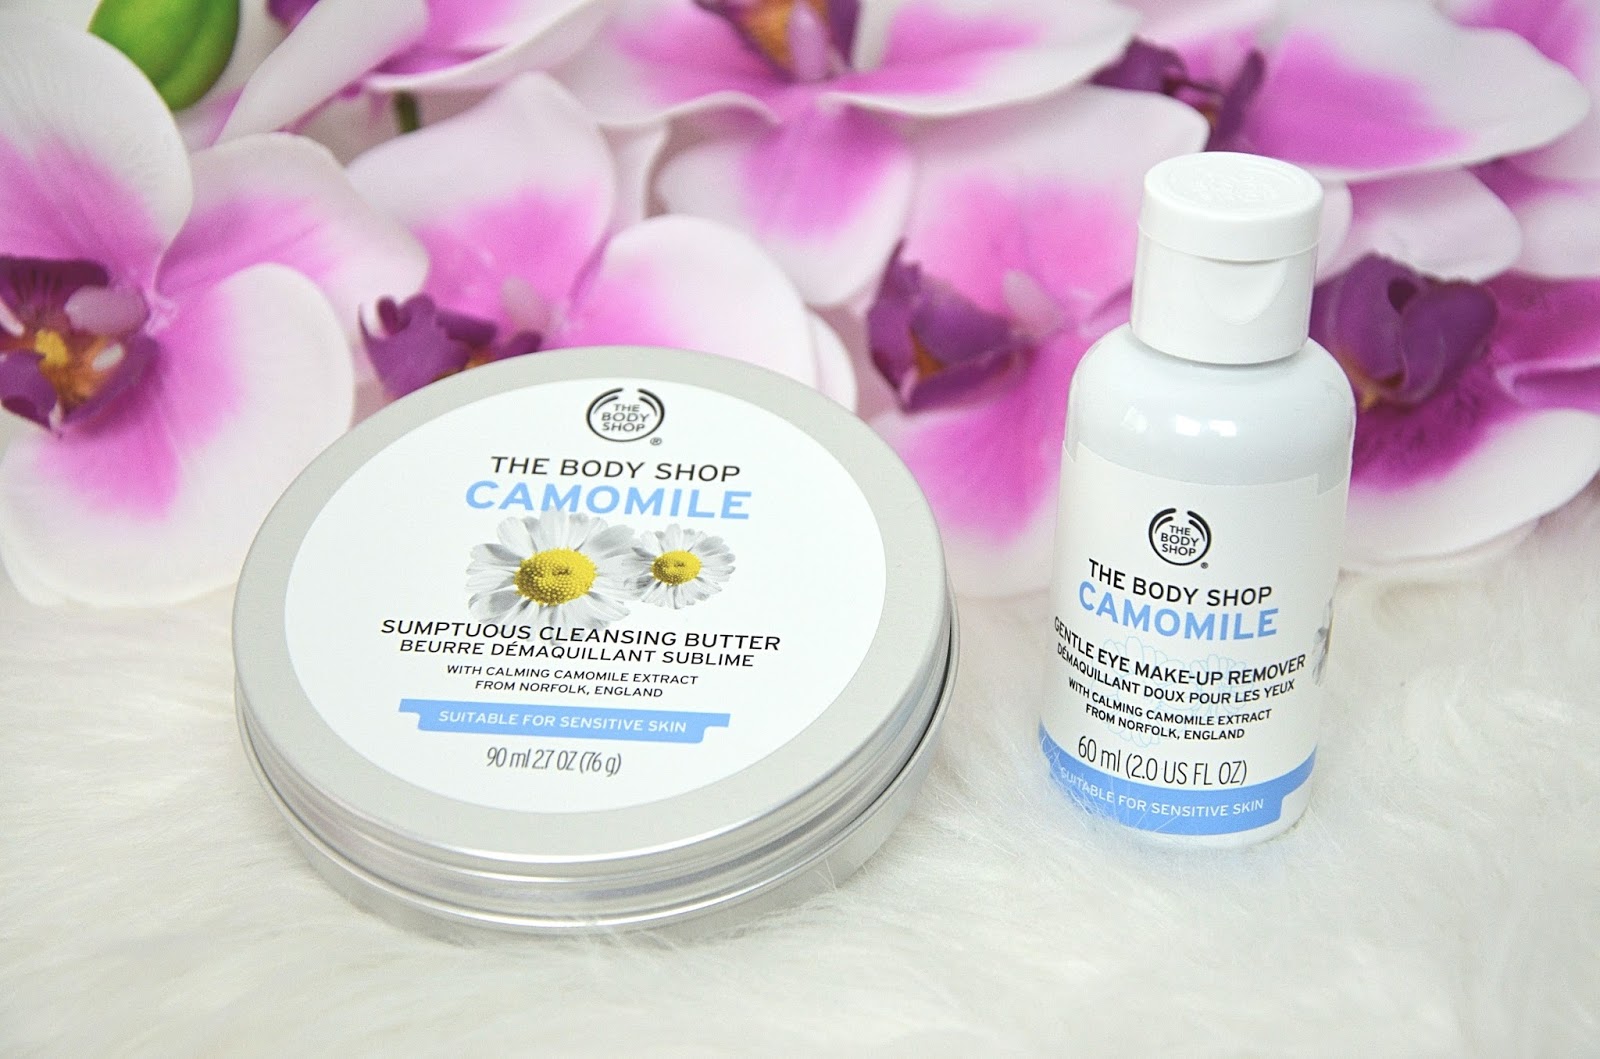 collection Camomille The body Shop beauty blogger blogueuse beauté